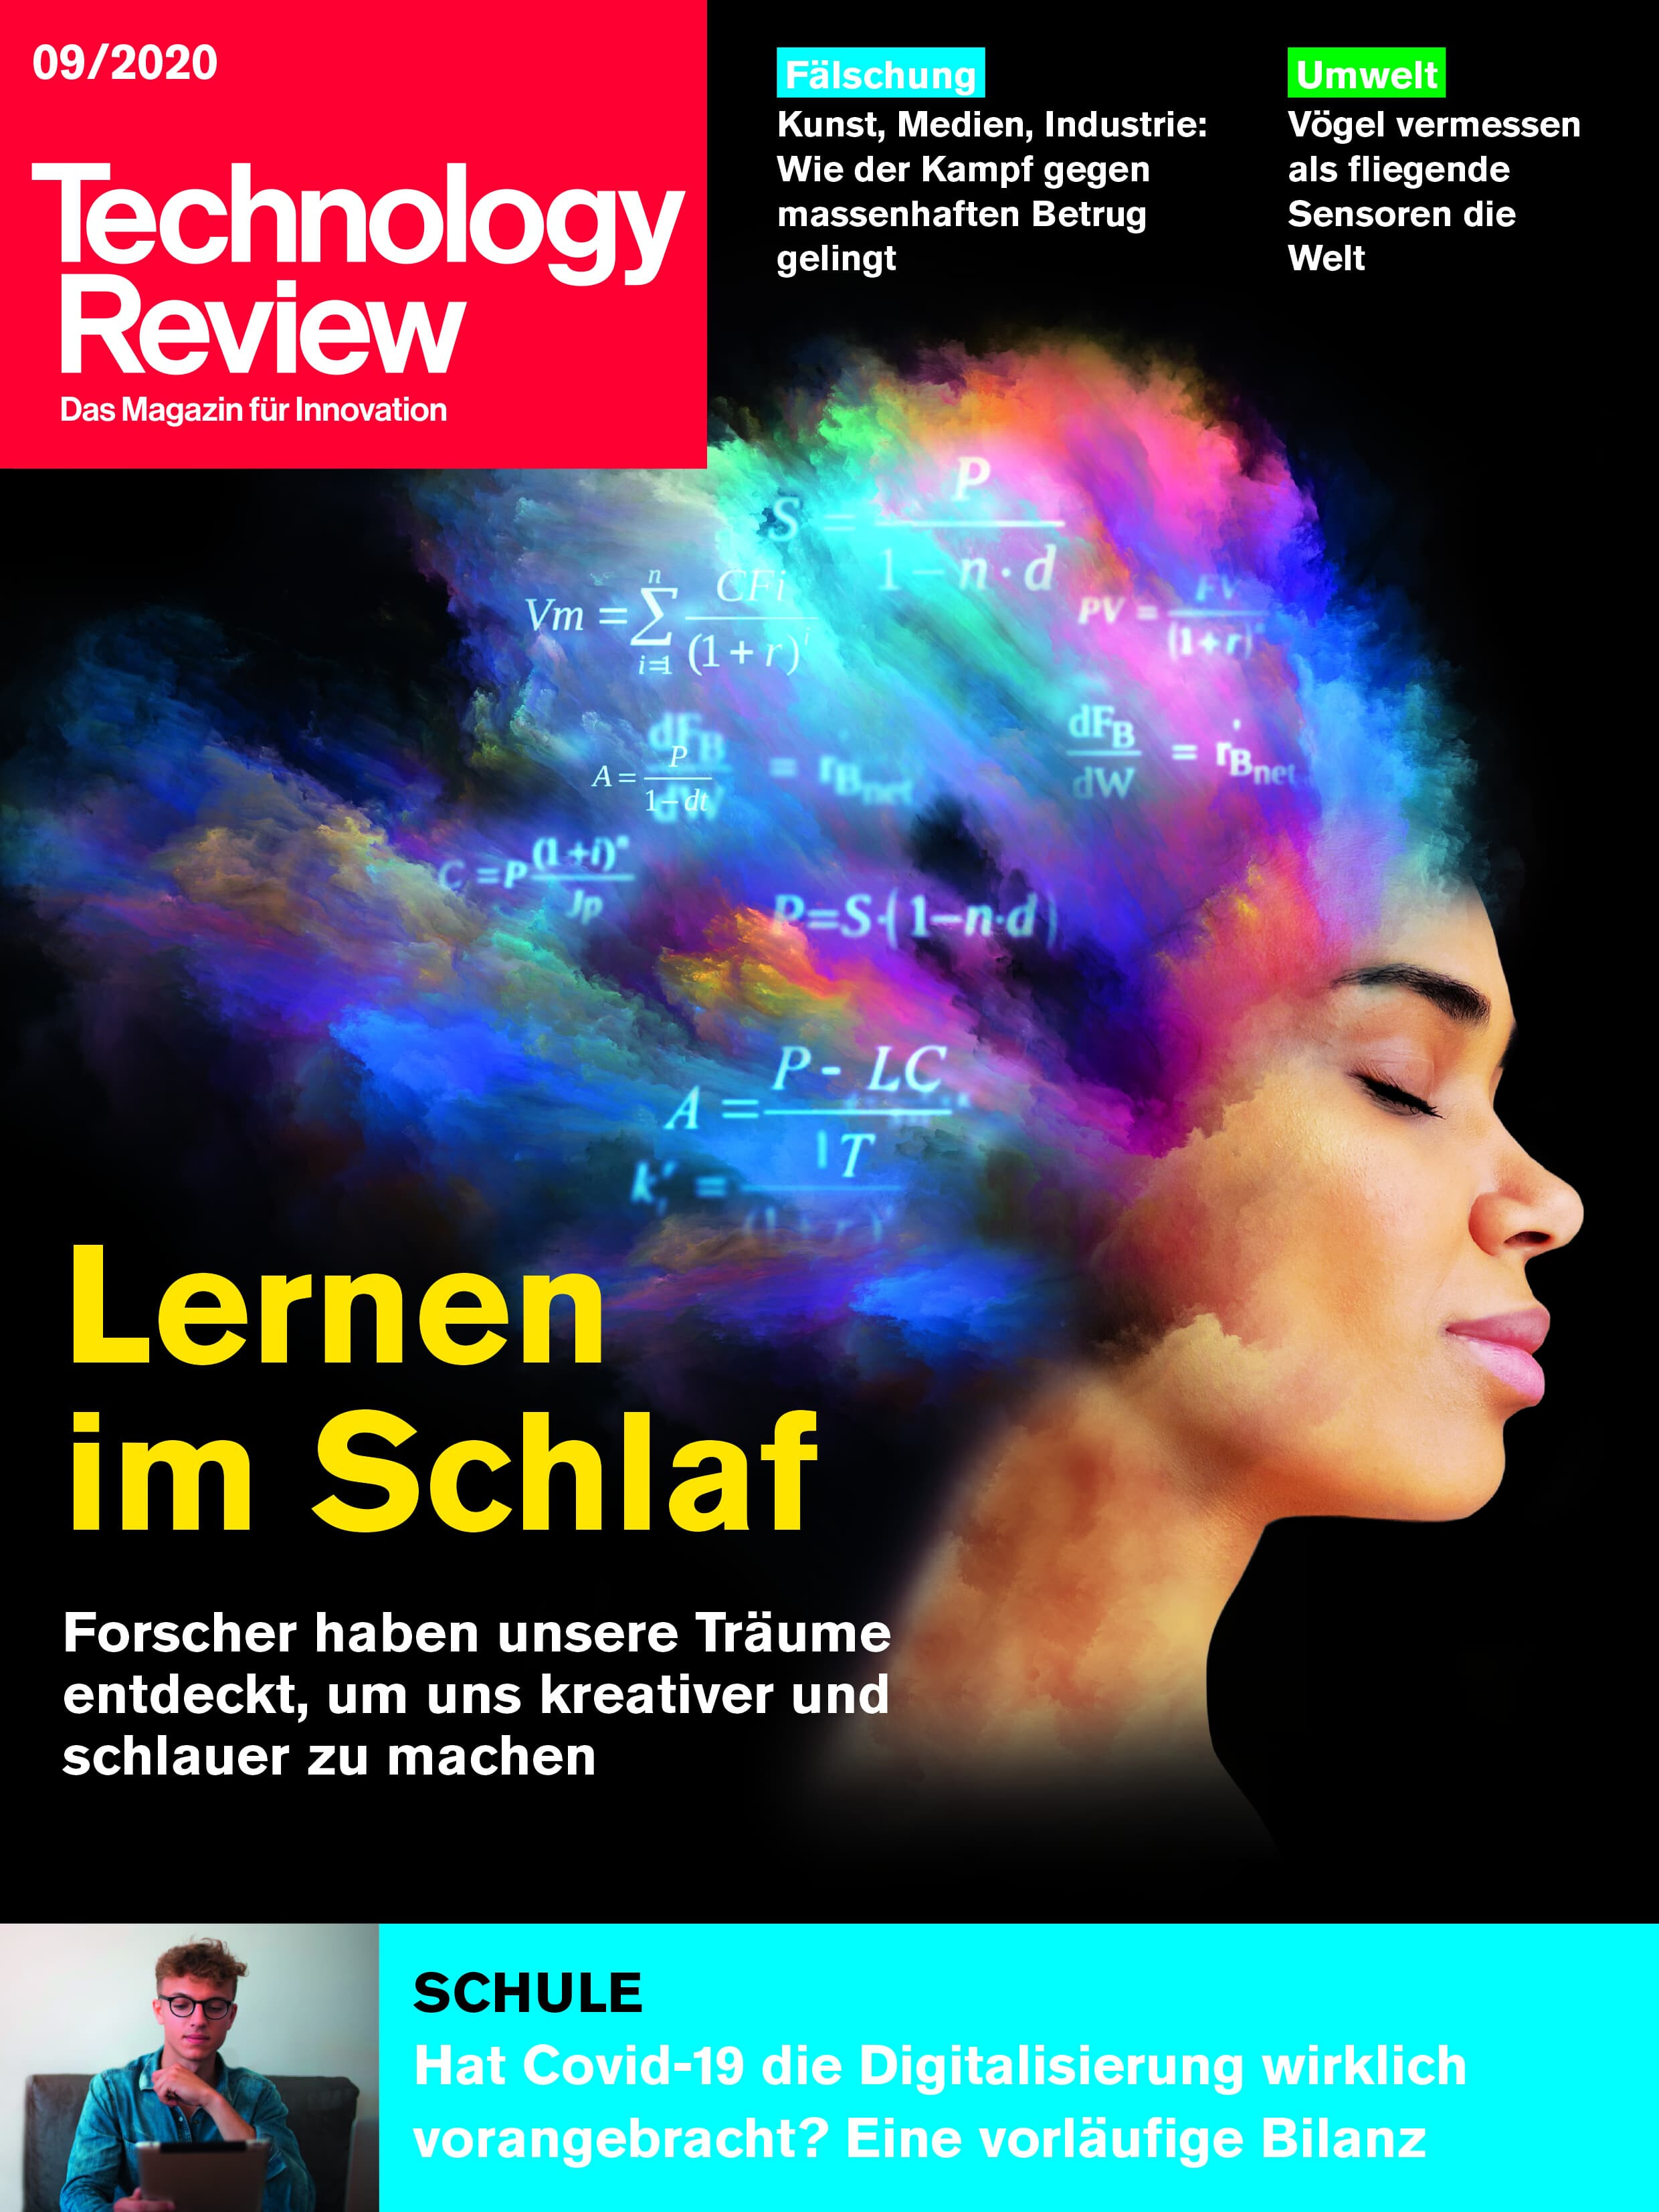 Technology Review 09/2020